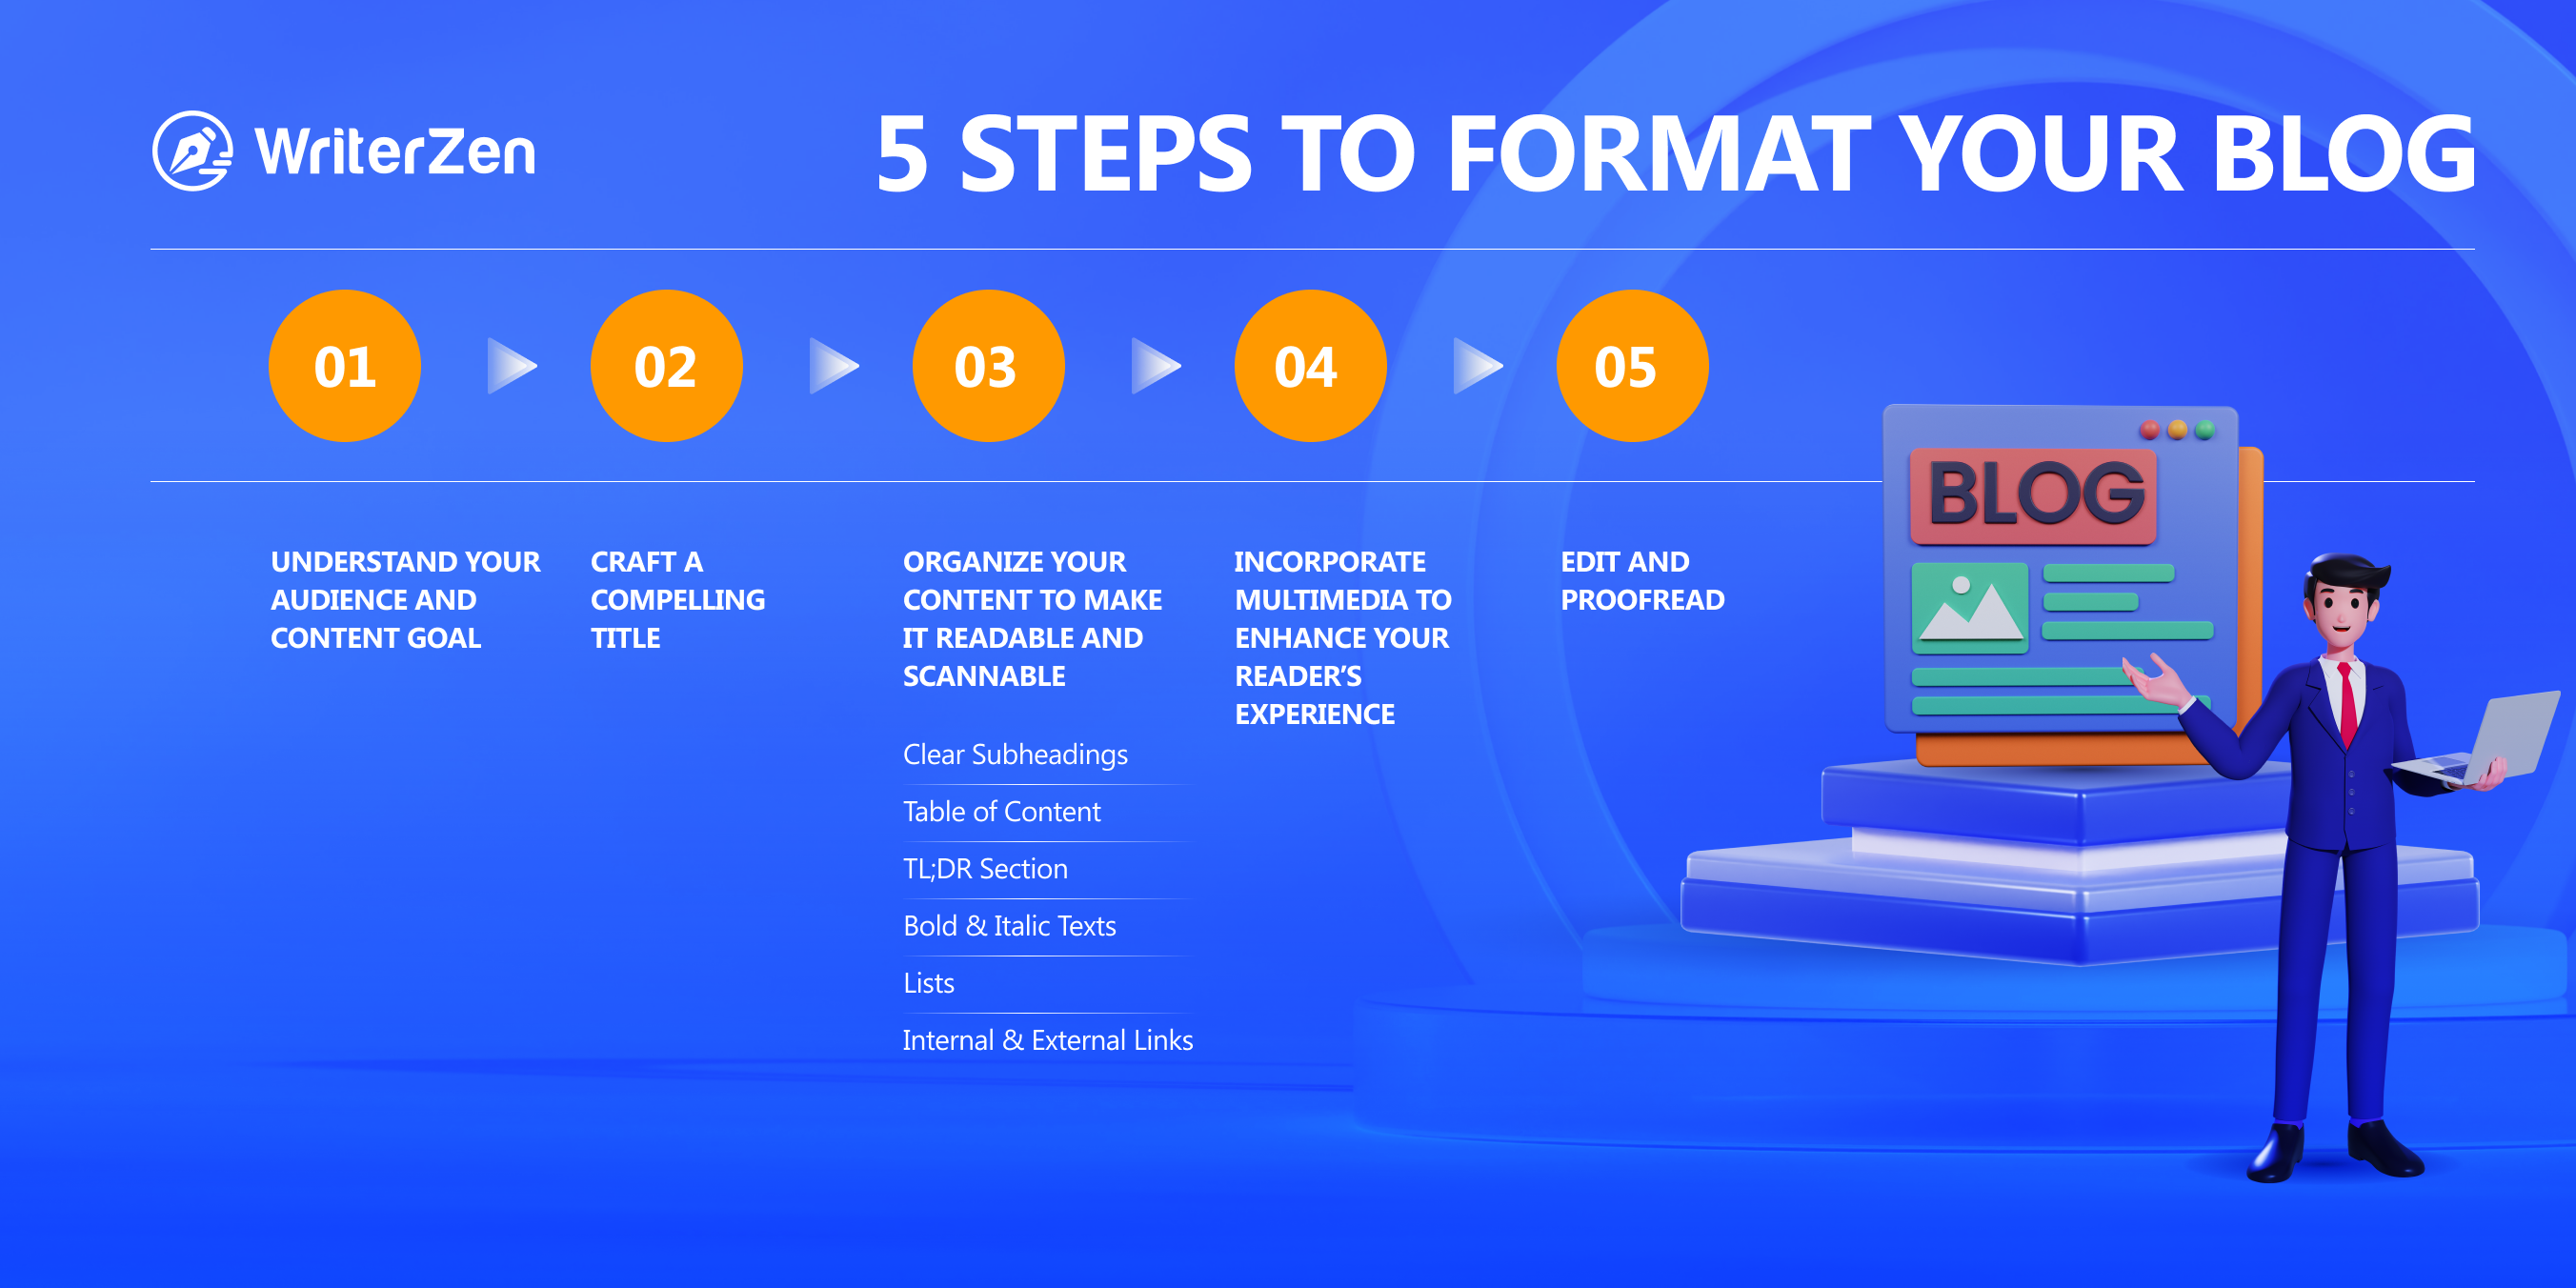 5 Steps to Format Your Blog